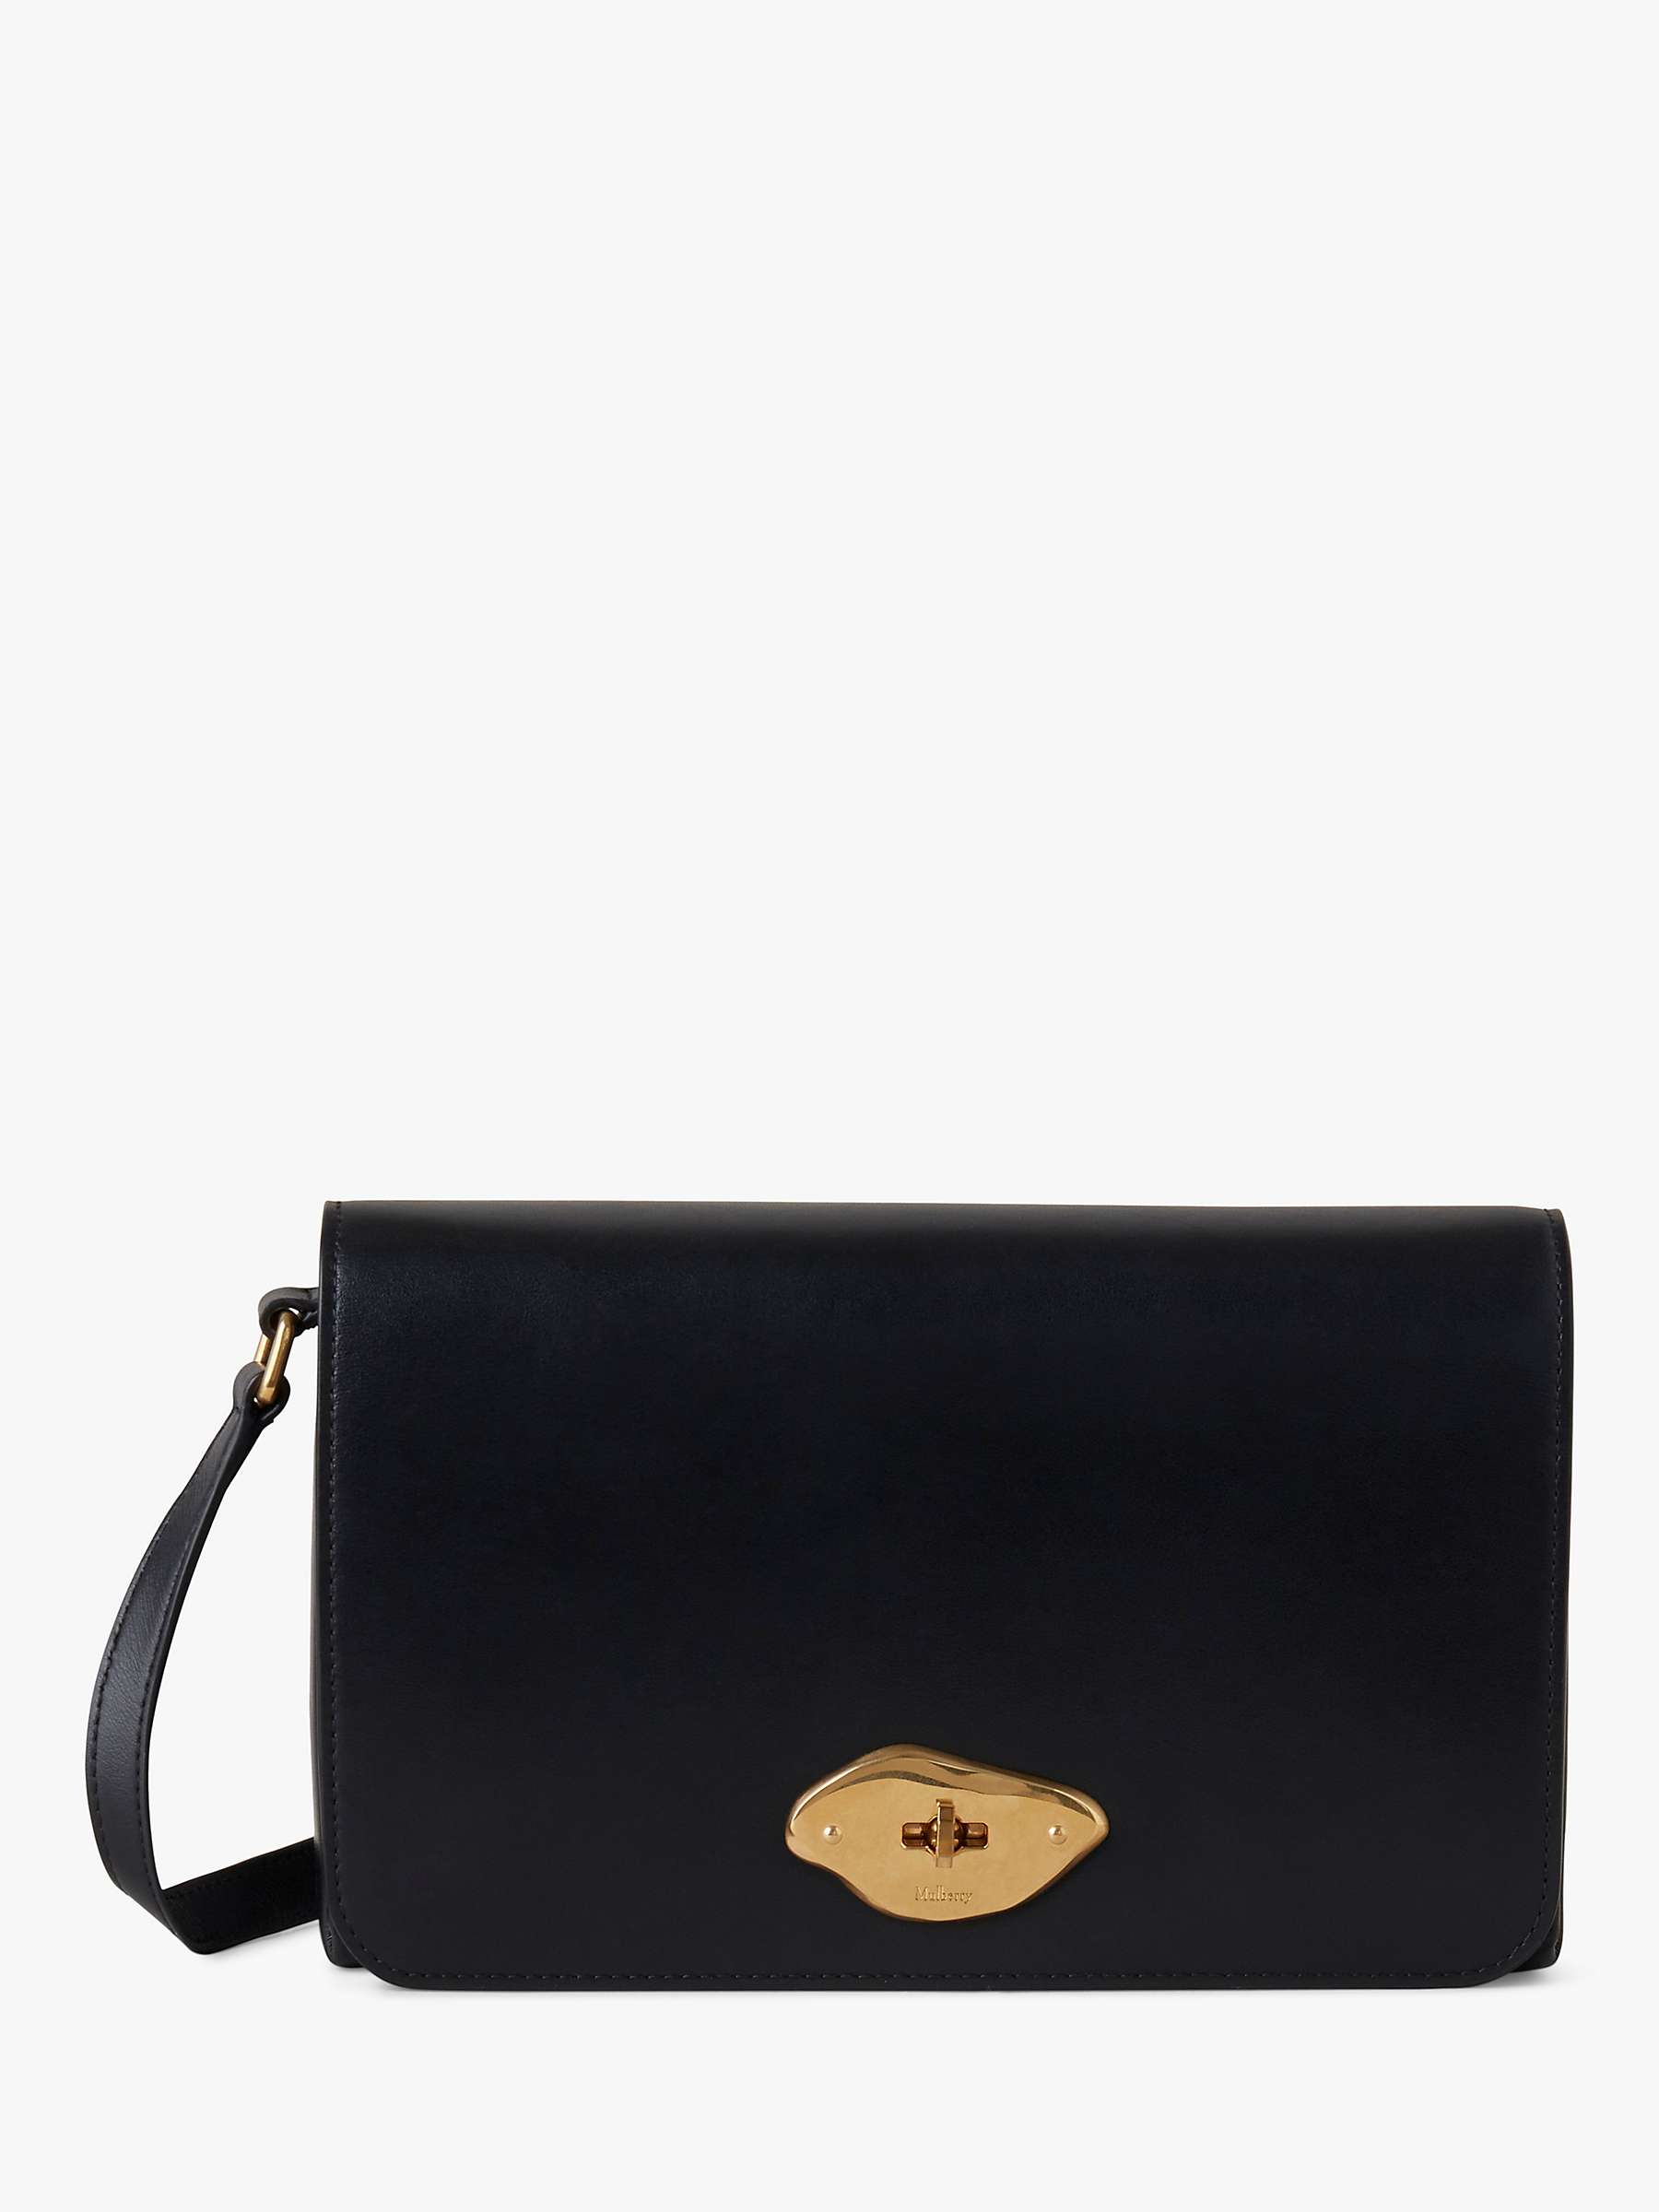 Buy Mulberry Lana Gloss Leather Wallet on a Strap Online at johnlewis.com